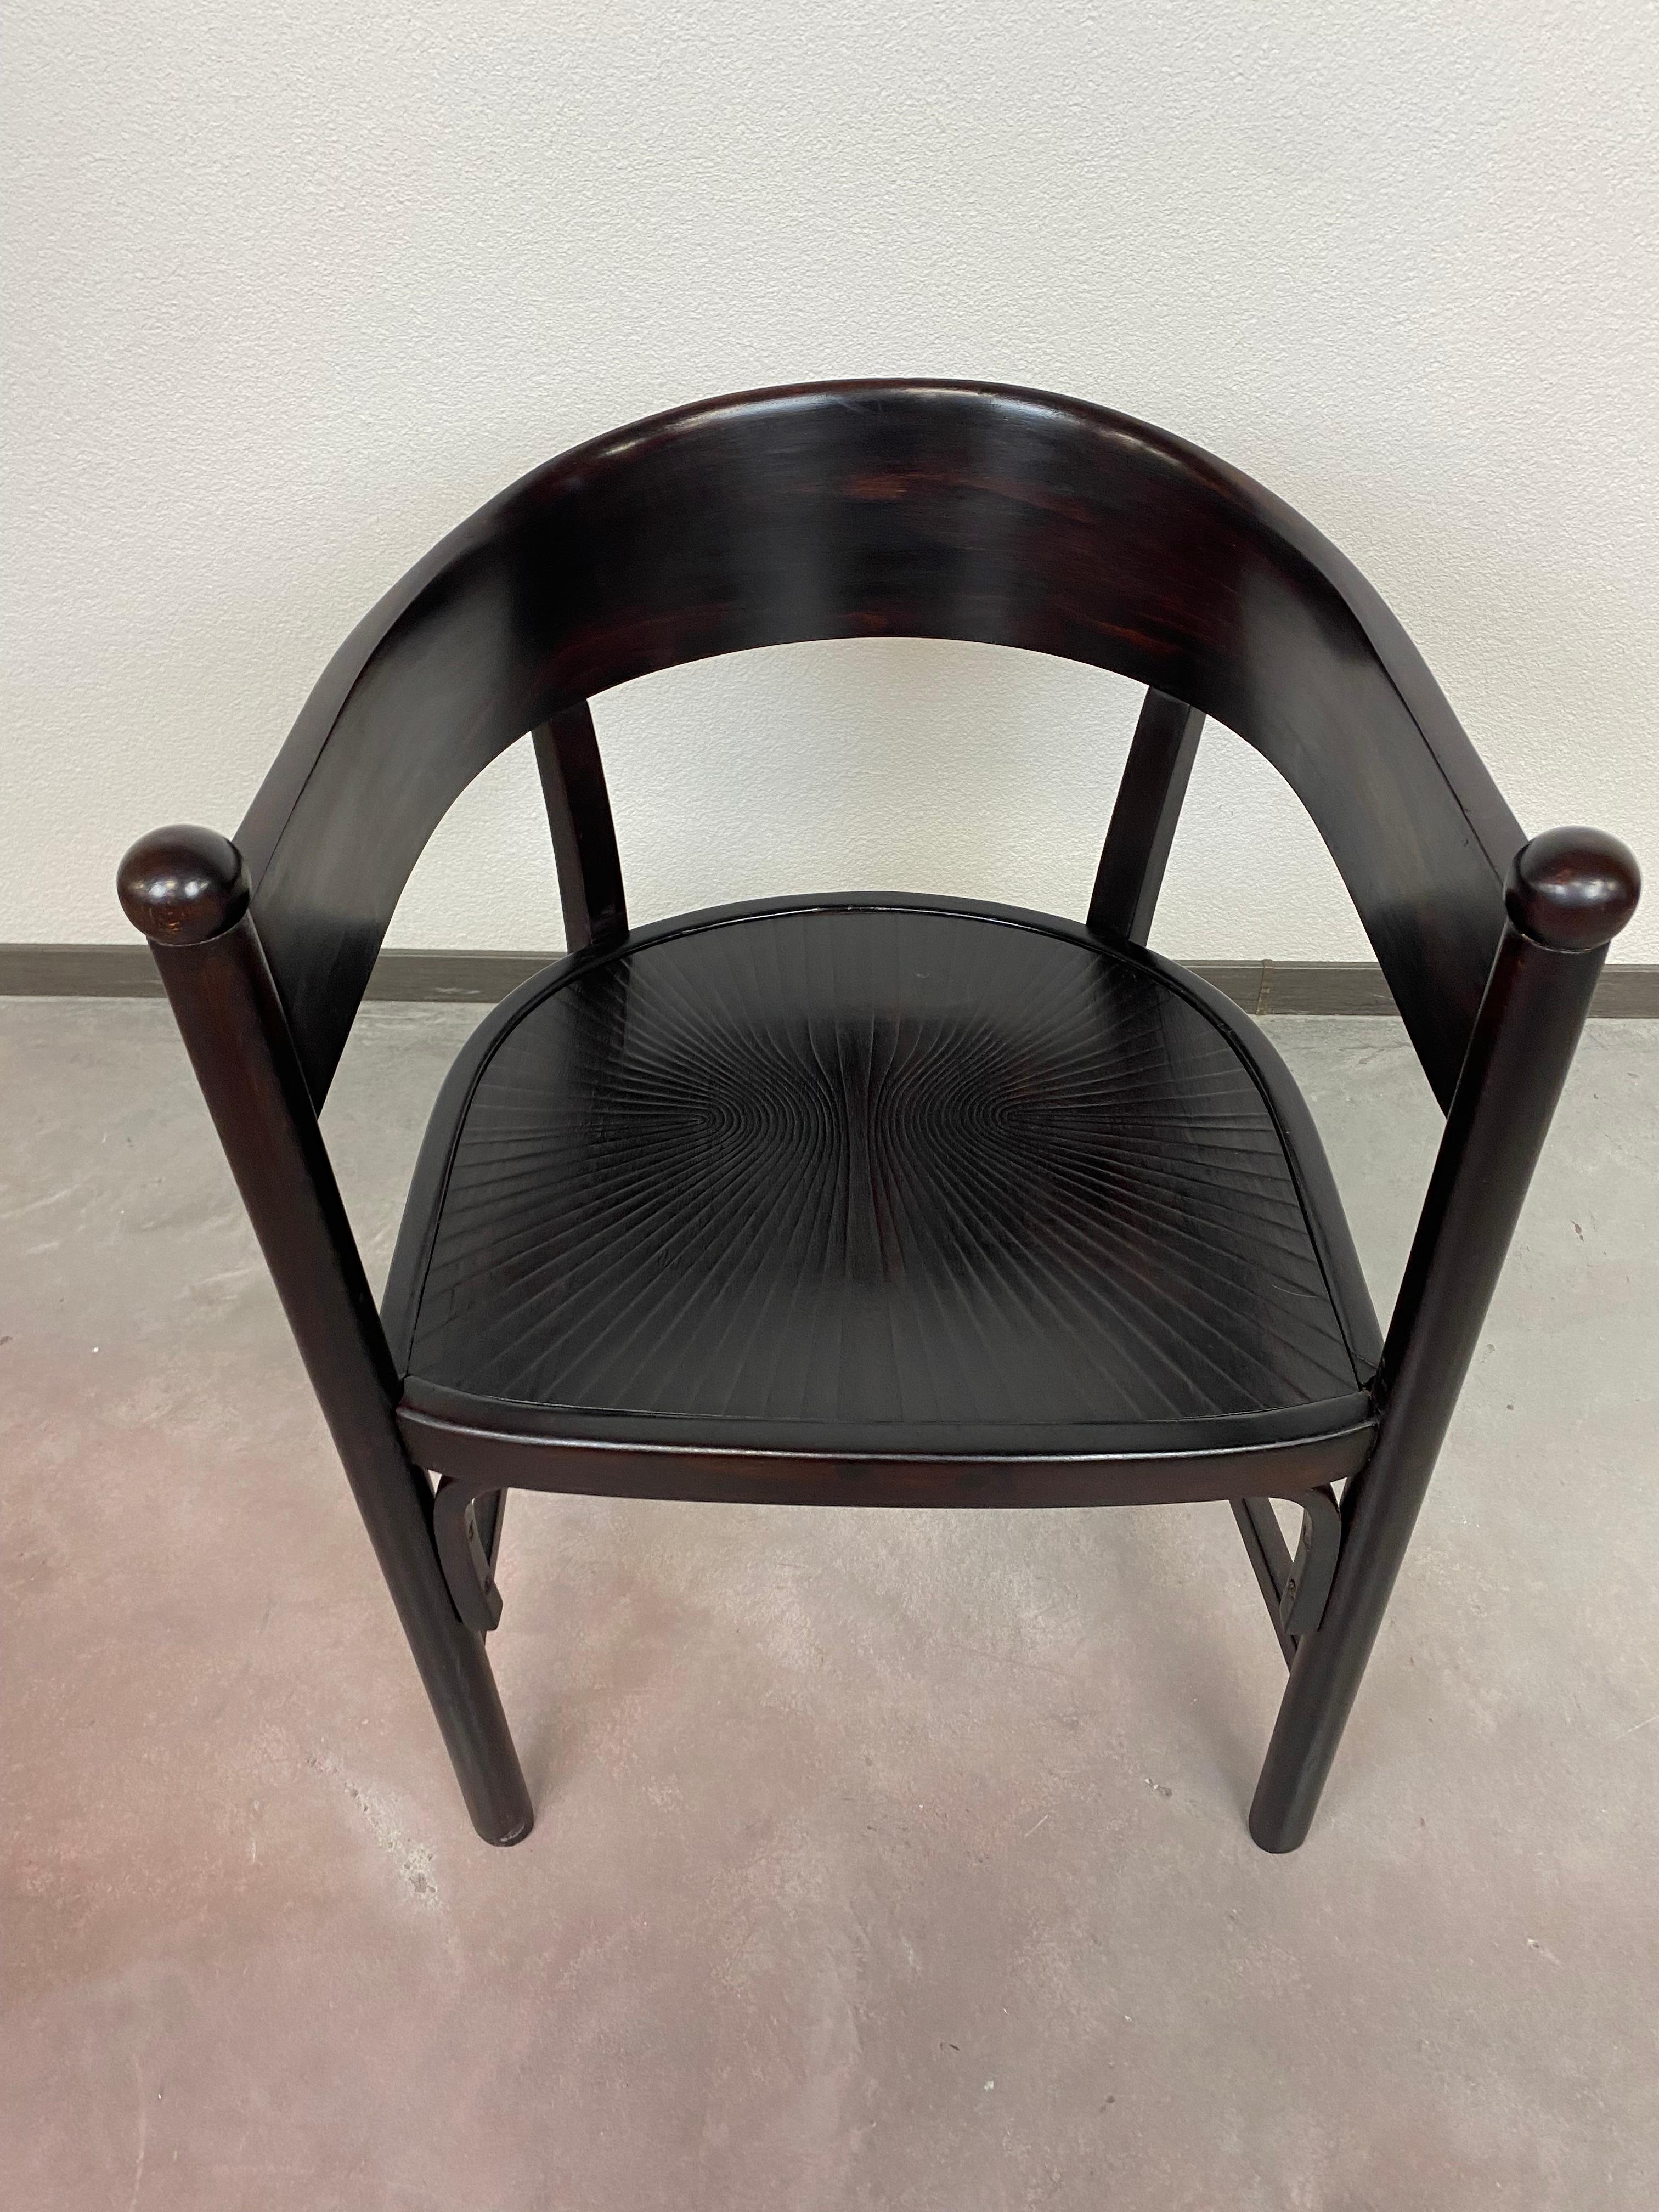 Large secession armchair by Josef Hoffmann for Thonet professionally stained and repolished. Marked on the bottom.